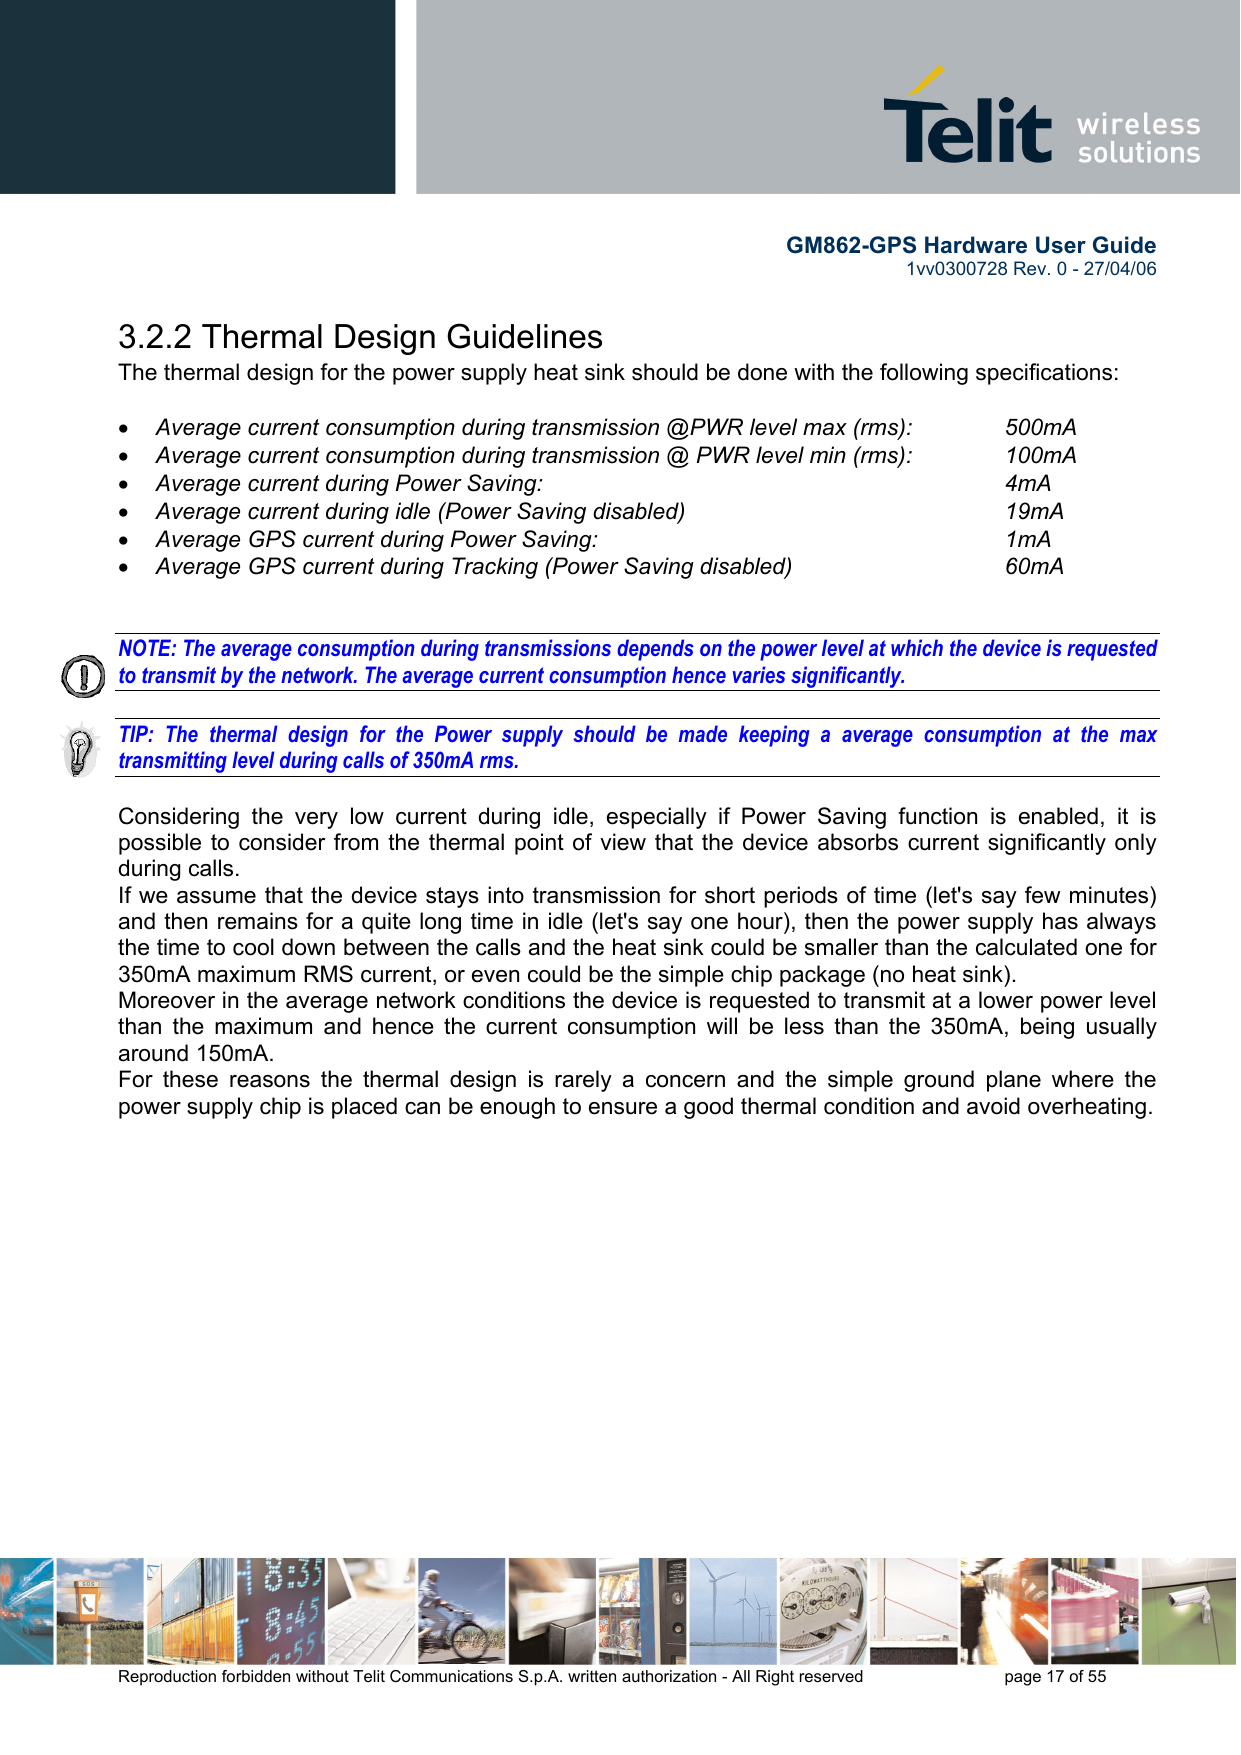        GM862-GPS Hardware User Guide   1vv0300728 Rev. 0 - 27/04/06    Reproduction forbidden without Telit Communications S.p.A. written authorization - All Right reserved    page 17 of 55  3.2.2 Thermal Design Guidelines The thermal design for the power supply heat sink should be done with the following specifications:  •  Average current consumption during transmission @PWR level max (rms):   500mA •  Average current consumption during transmission @ PWR level min (rms):   100mA  •  Average current during Power Saving:             4mA •  Average current during idle (Power Saving disabled)        19mA •  Average GPS current during Power Saving:           1mA •  Average GPS current during Tracking (Power Saving disabled)      60mA   NOTE: The average consumption during transmissions depends on the power level at which the device is requested to transmit by the network. The average current consumption hence varies significantly.  TIP: The thermal design for the Power supply should be made keeping a average consumption at the max transmitting level during calls of 350mA rms.  Considering the very low current during idle, especially if Power Saving function is enabled, it is possible to consider from the thermal point of view that the device absorbs current significantly only during calls.  If we assume that the device stays into transmission for short periods of time (let&apos;s say few minutes) and then remains for a quite long time in idle (let&apos;s say one hour), then the power supply has always the time to cool down between the calls and the heat sink could be smaller than the calculated one for 350mA maximum RMS current, or even could be the simple chip package (no heat sink). Moreover in the average network conditions the device is requested to transmit at a lower power level than the maximum and hence the current consumption will be less than the 350mA, being usually around 150mA. For these reasons the thermal design is rarely a concern and the simple ground plane where the power supply chip is placed can be enough to ensure a good thermal condition and avoid overheating.   